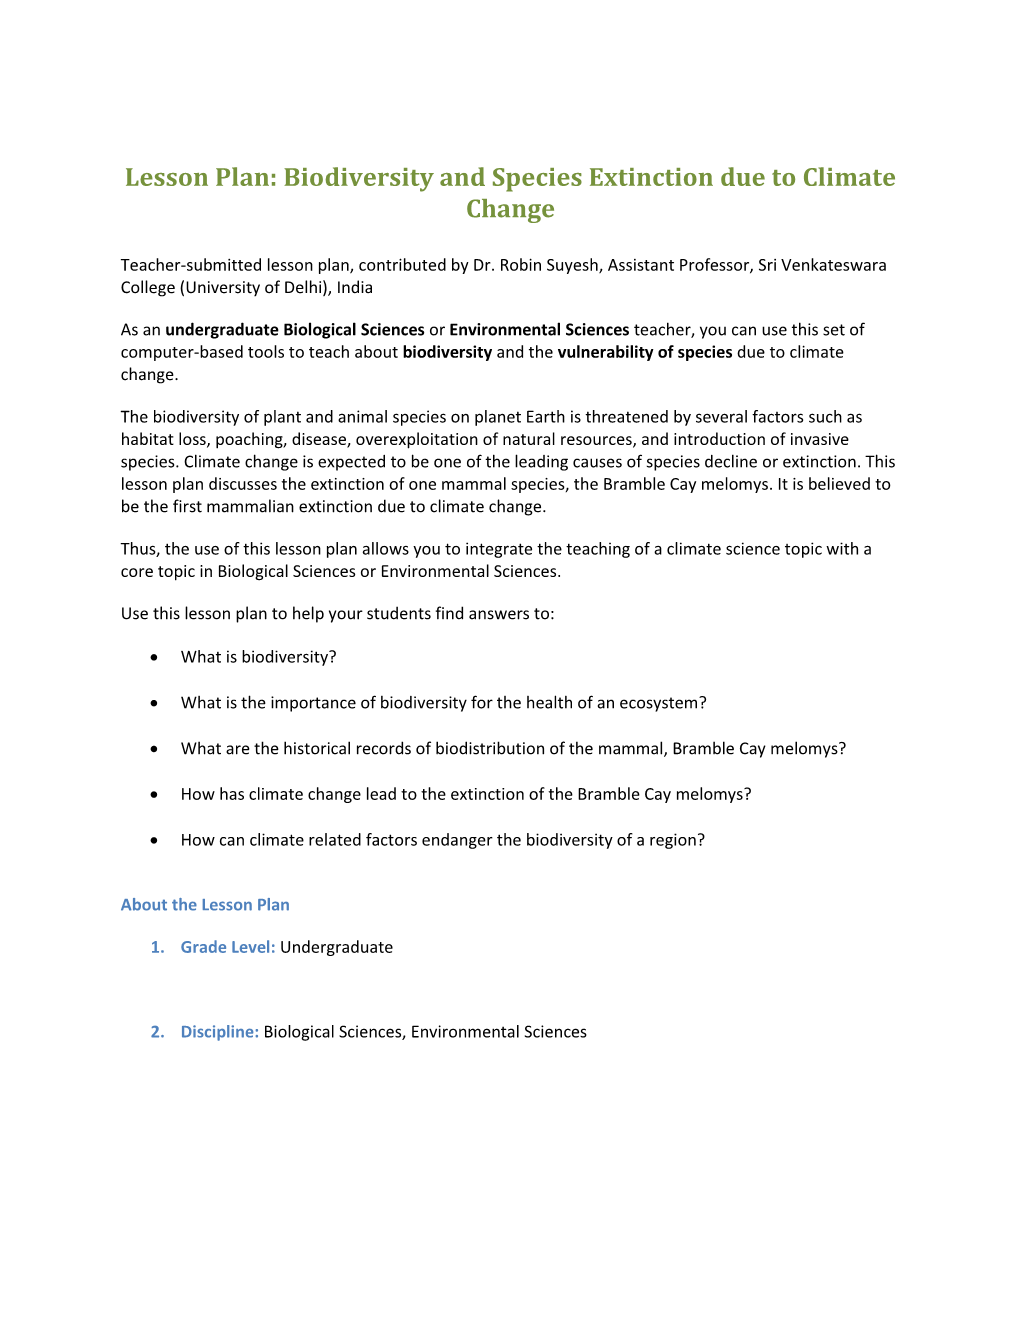 Lesson Plan: Biodiversity and Species Extinction Due to Climate Change